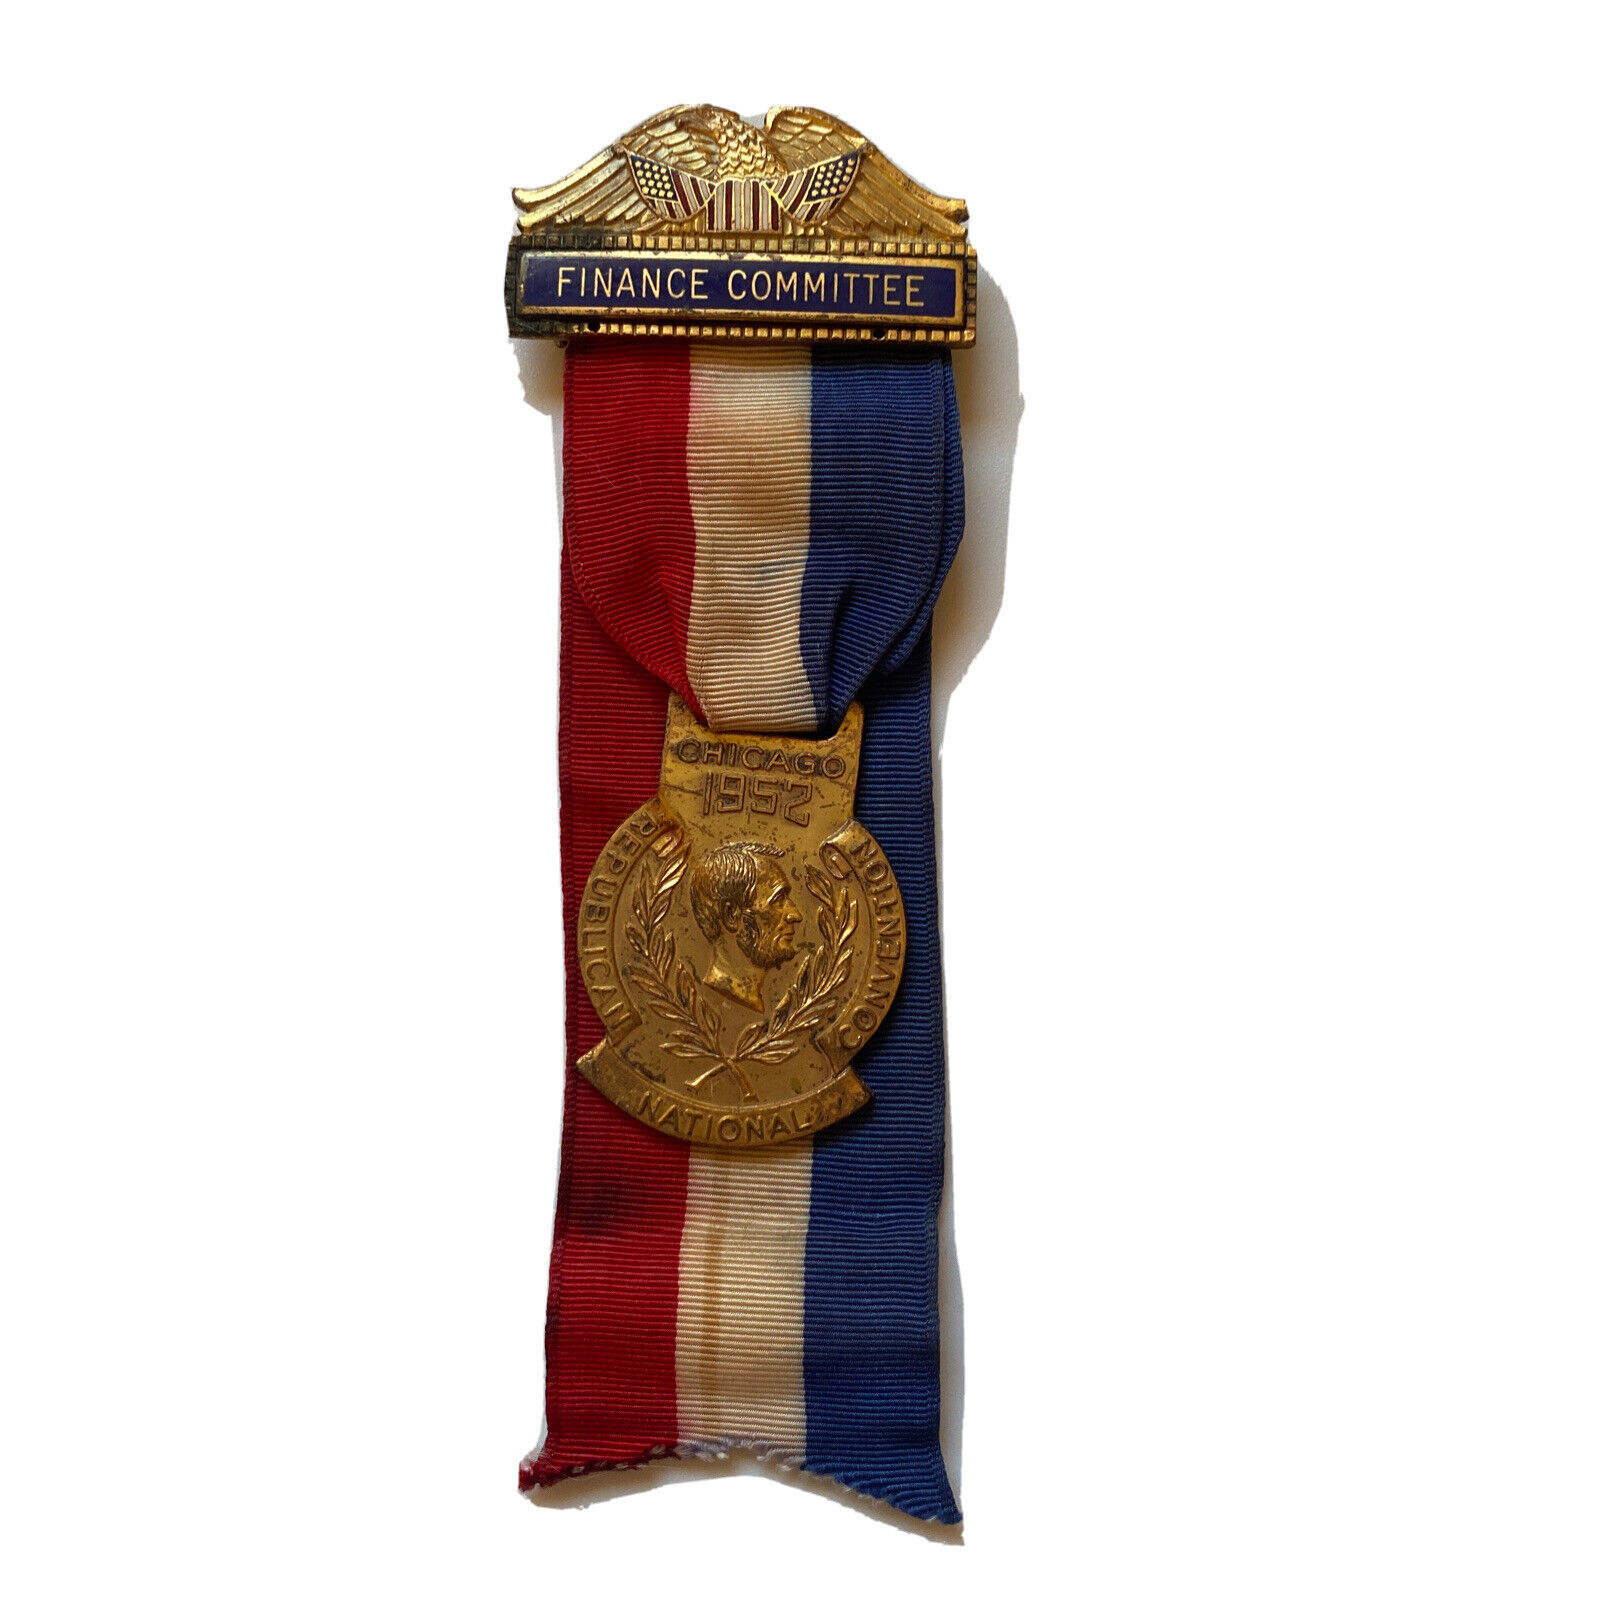 1952 Republican National Convention Finance Committee Badge President Eisenhower